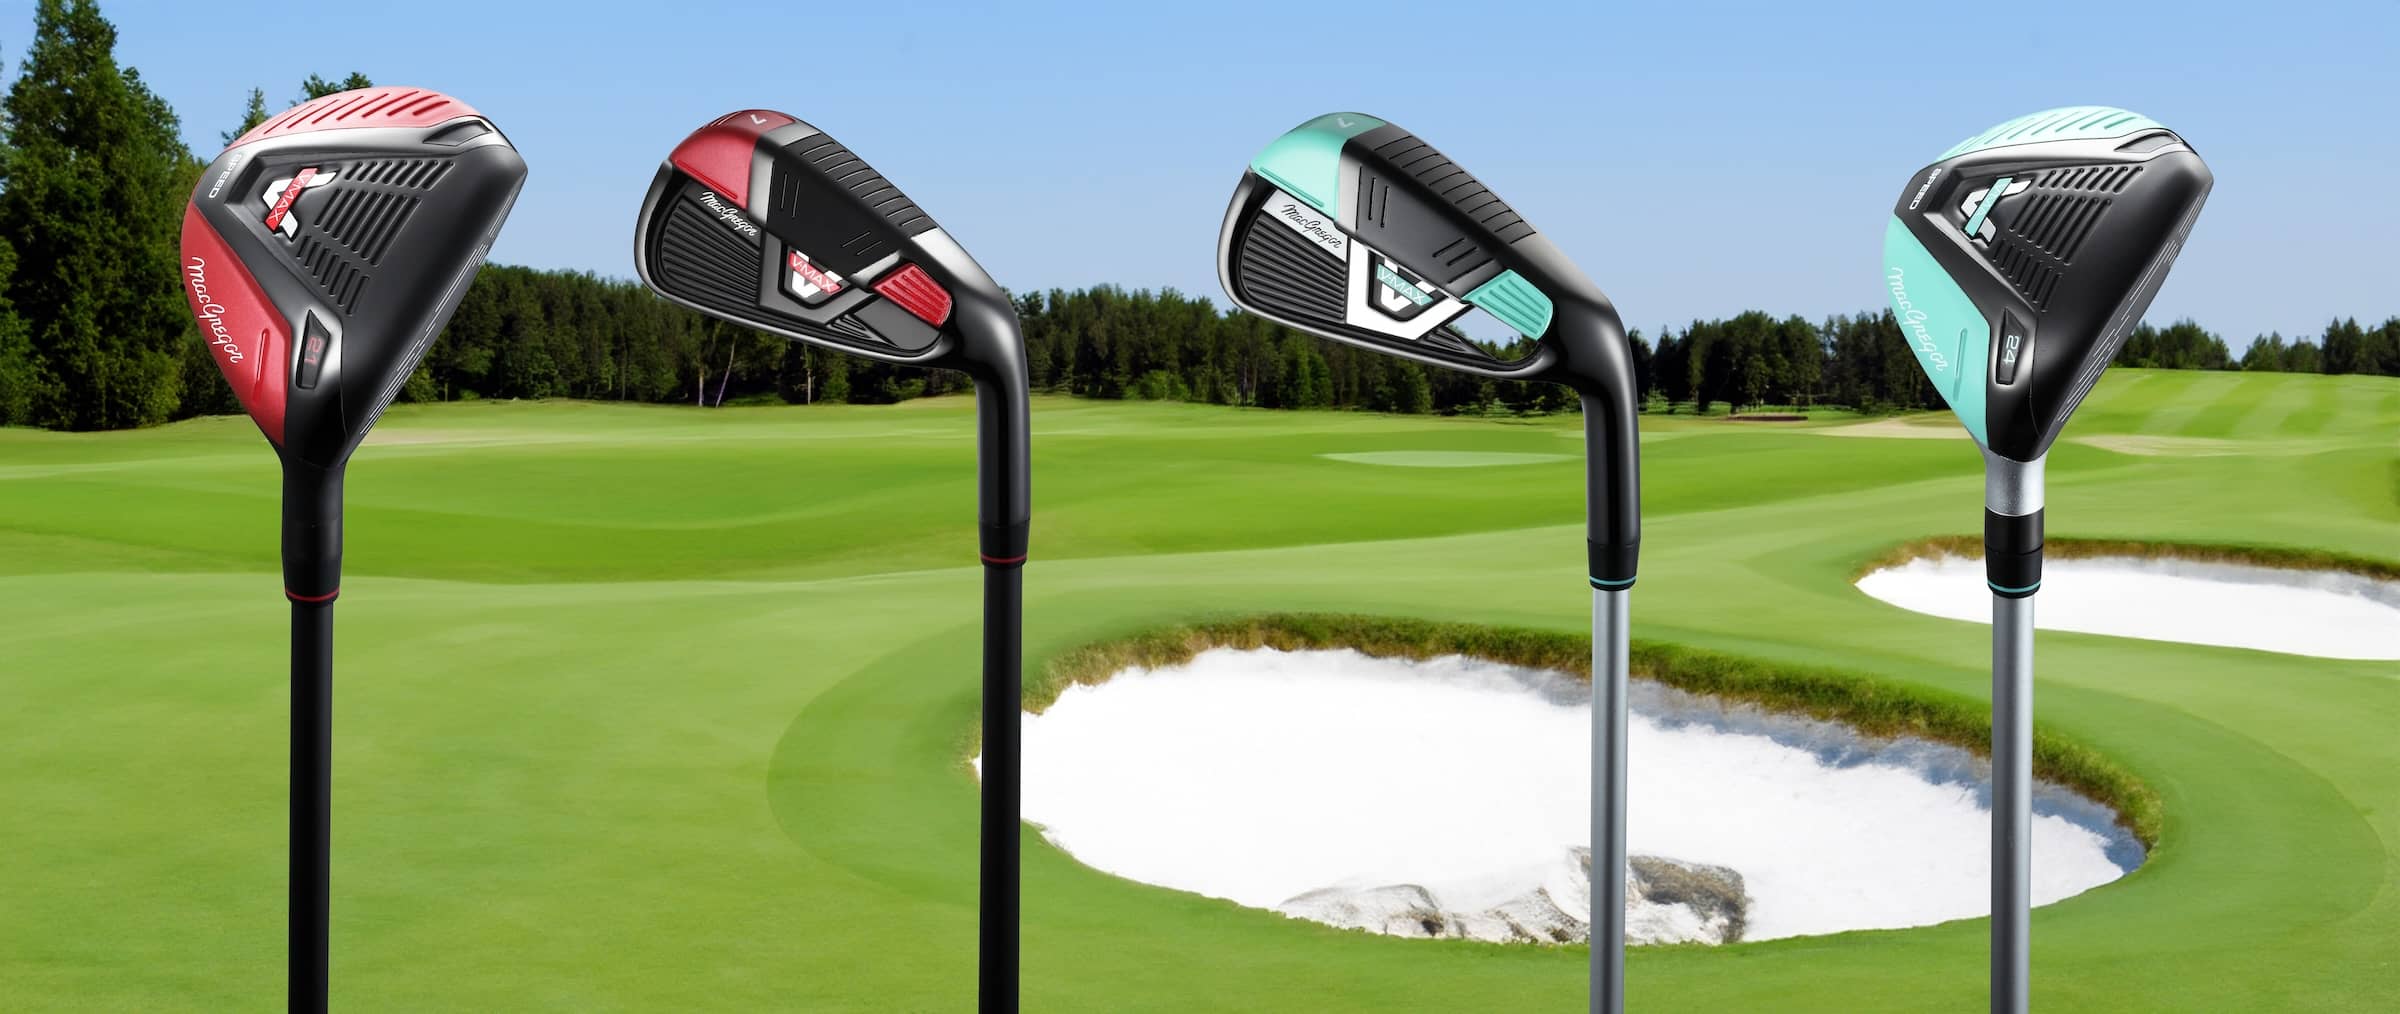 MacGregor Golf Irons and Hybrids